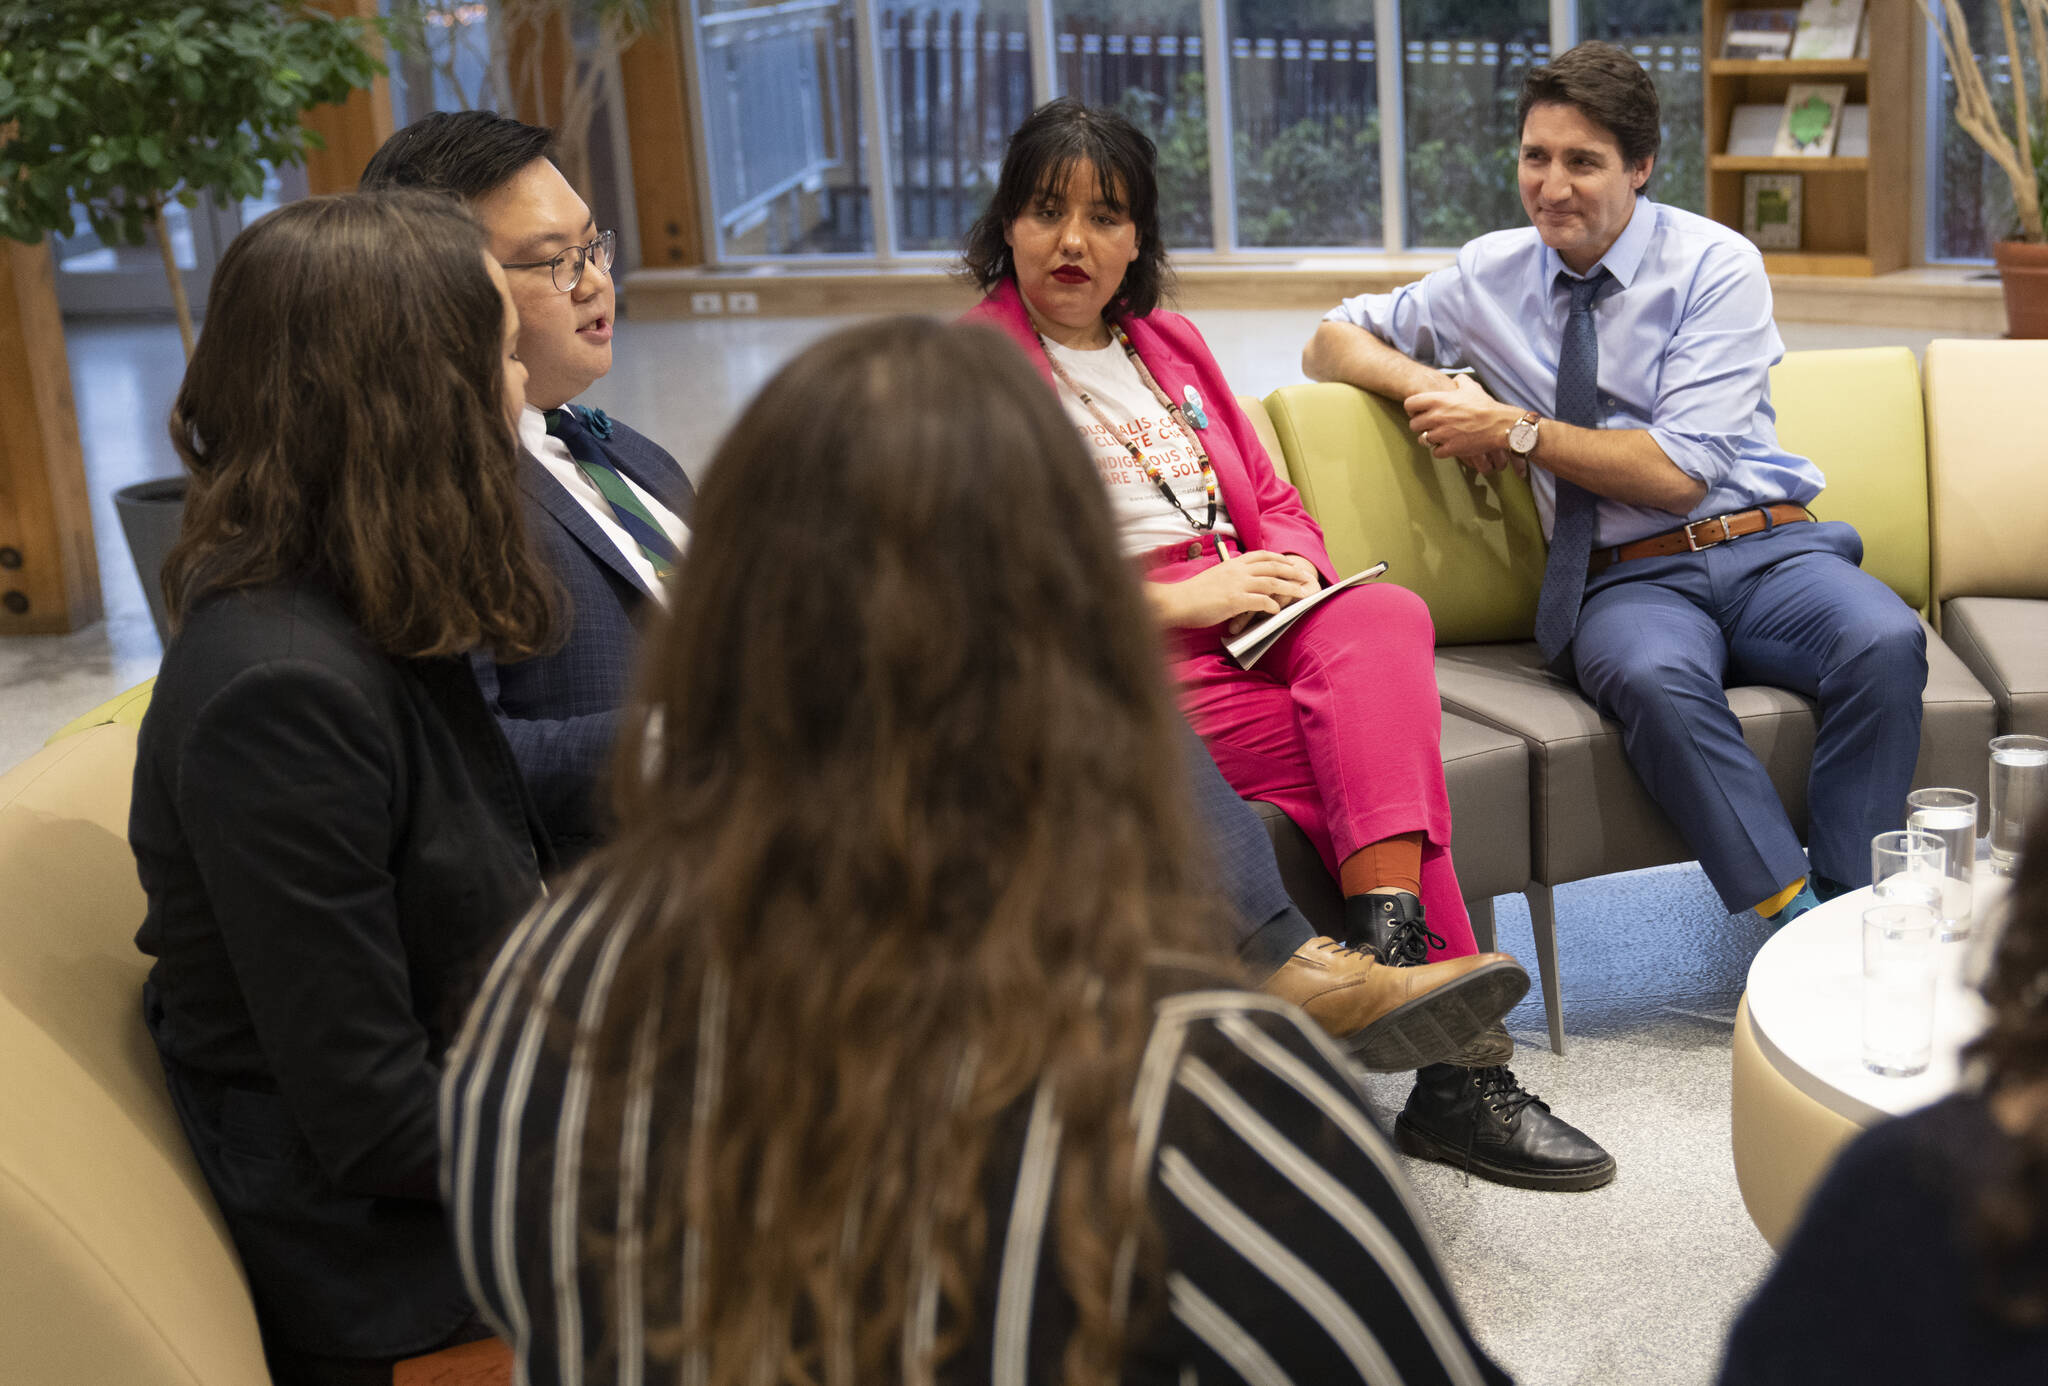 Prime Minister Justin Trudeau takes part in a discussion with members of the Environment and Climate Change Youth Council in Montreal on Wednesday, December 7, 2022. THE CANADIAN PRESS/Paul Chiasson